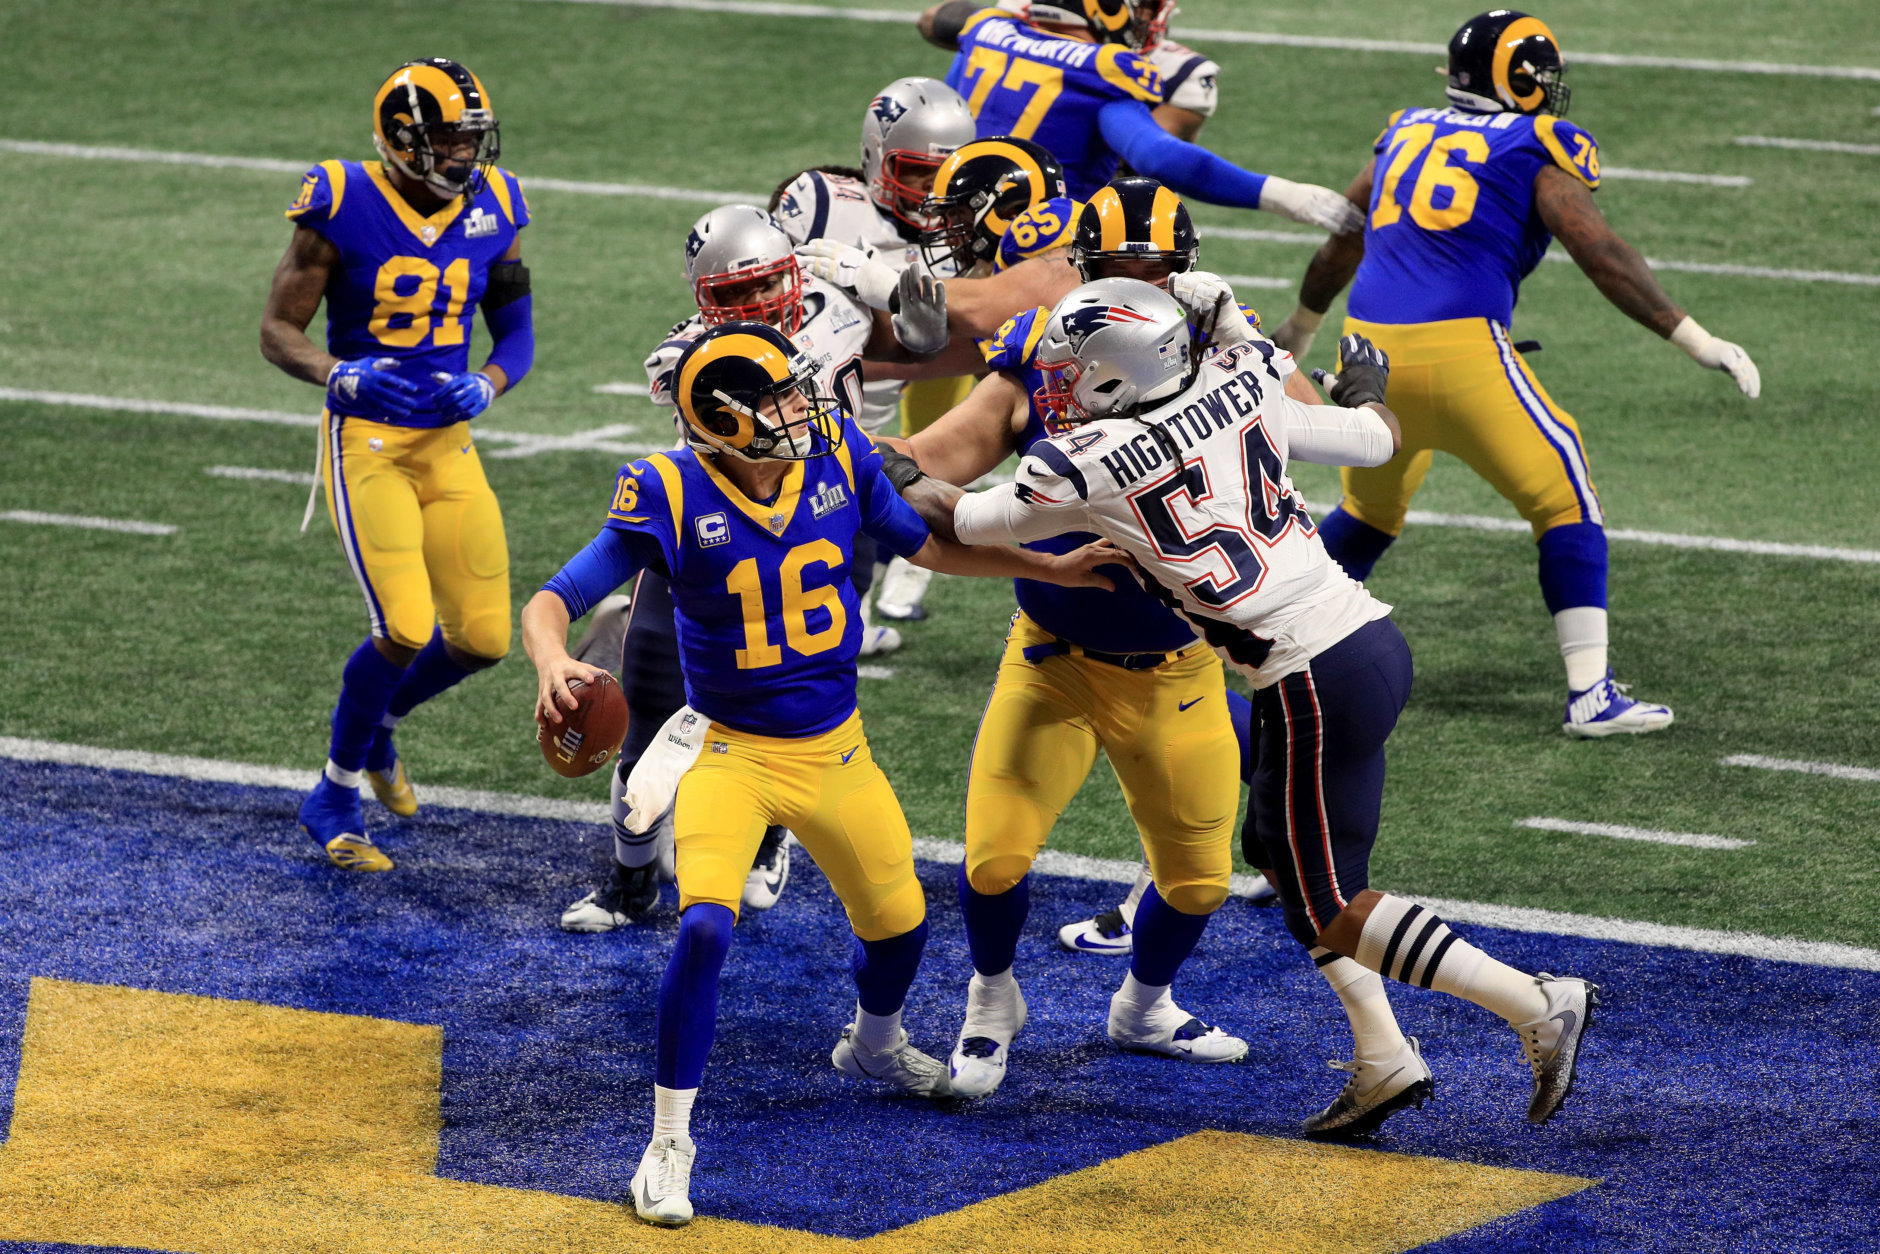 ATLANTA, GA - FEBRUARY 03:  Jared Goff #16 of the Los Angeles Rams is pressured by Dont'a Hightower #54 of the New England Patriots in the second half during Super Bowl LIII at Mercedes-Benz Stadium on February 3, 2019 in Atlanta, Georgia.  (Photo by Mike Ehrmann/Getty Images)